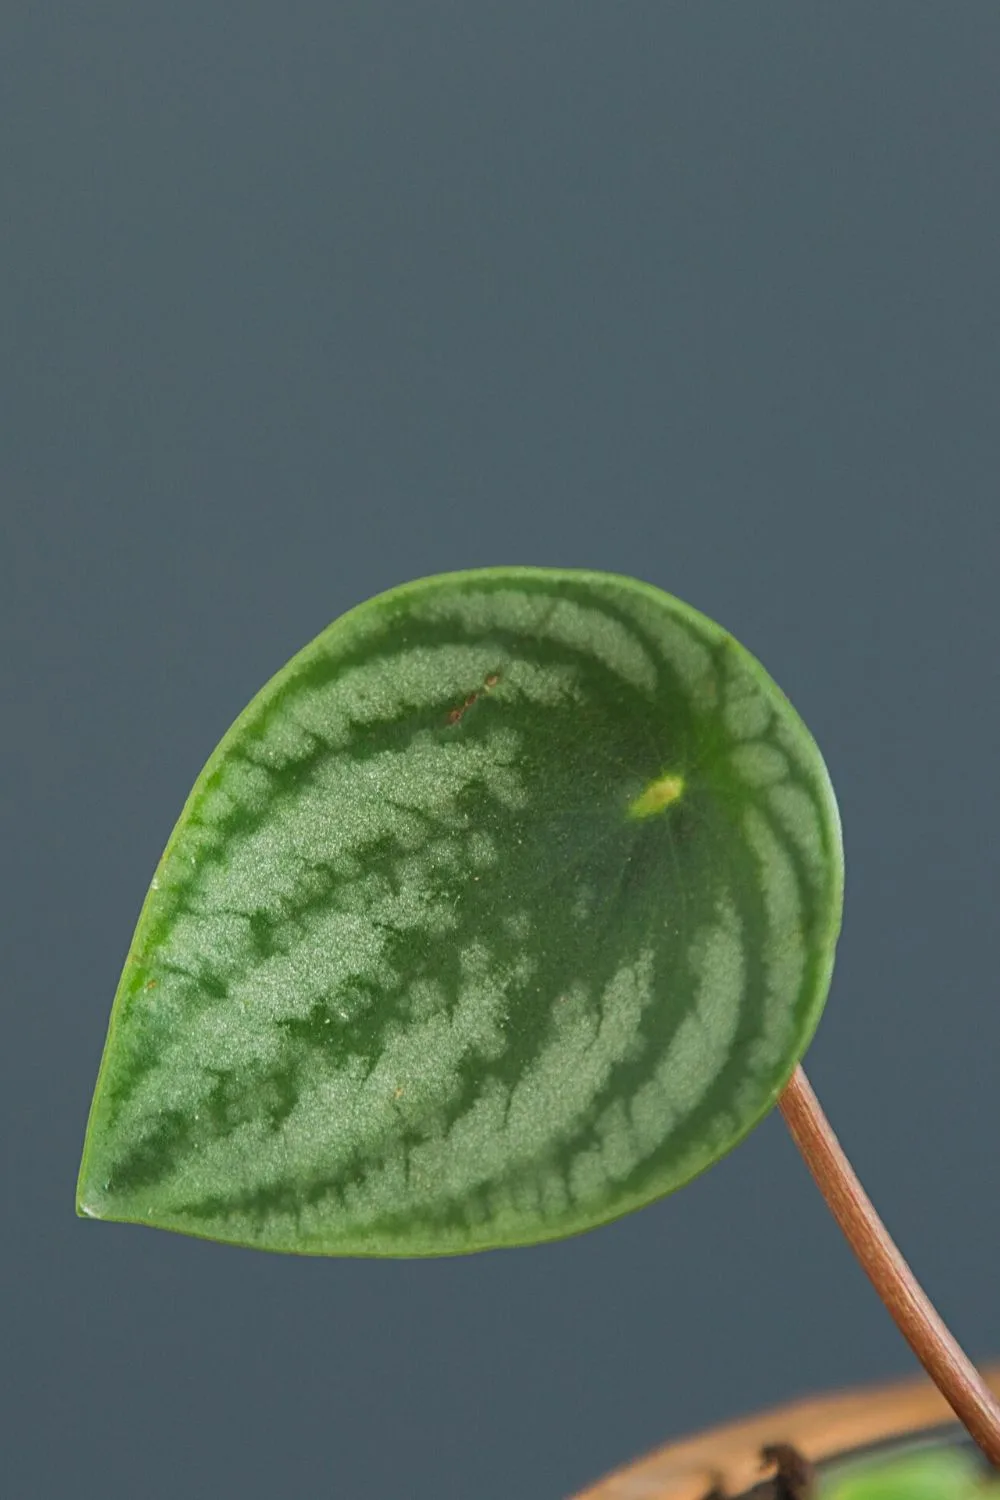 Once the baby Peperomia Watermelon plant has matured, you can cut off the mother leaf and propate it again